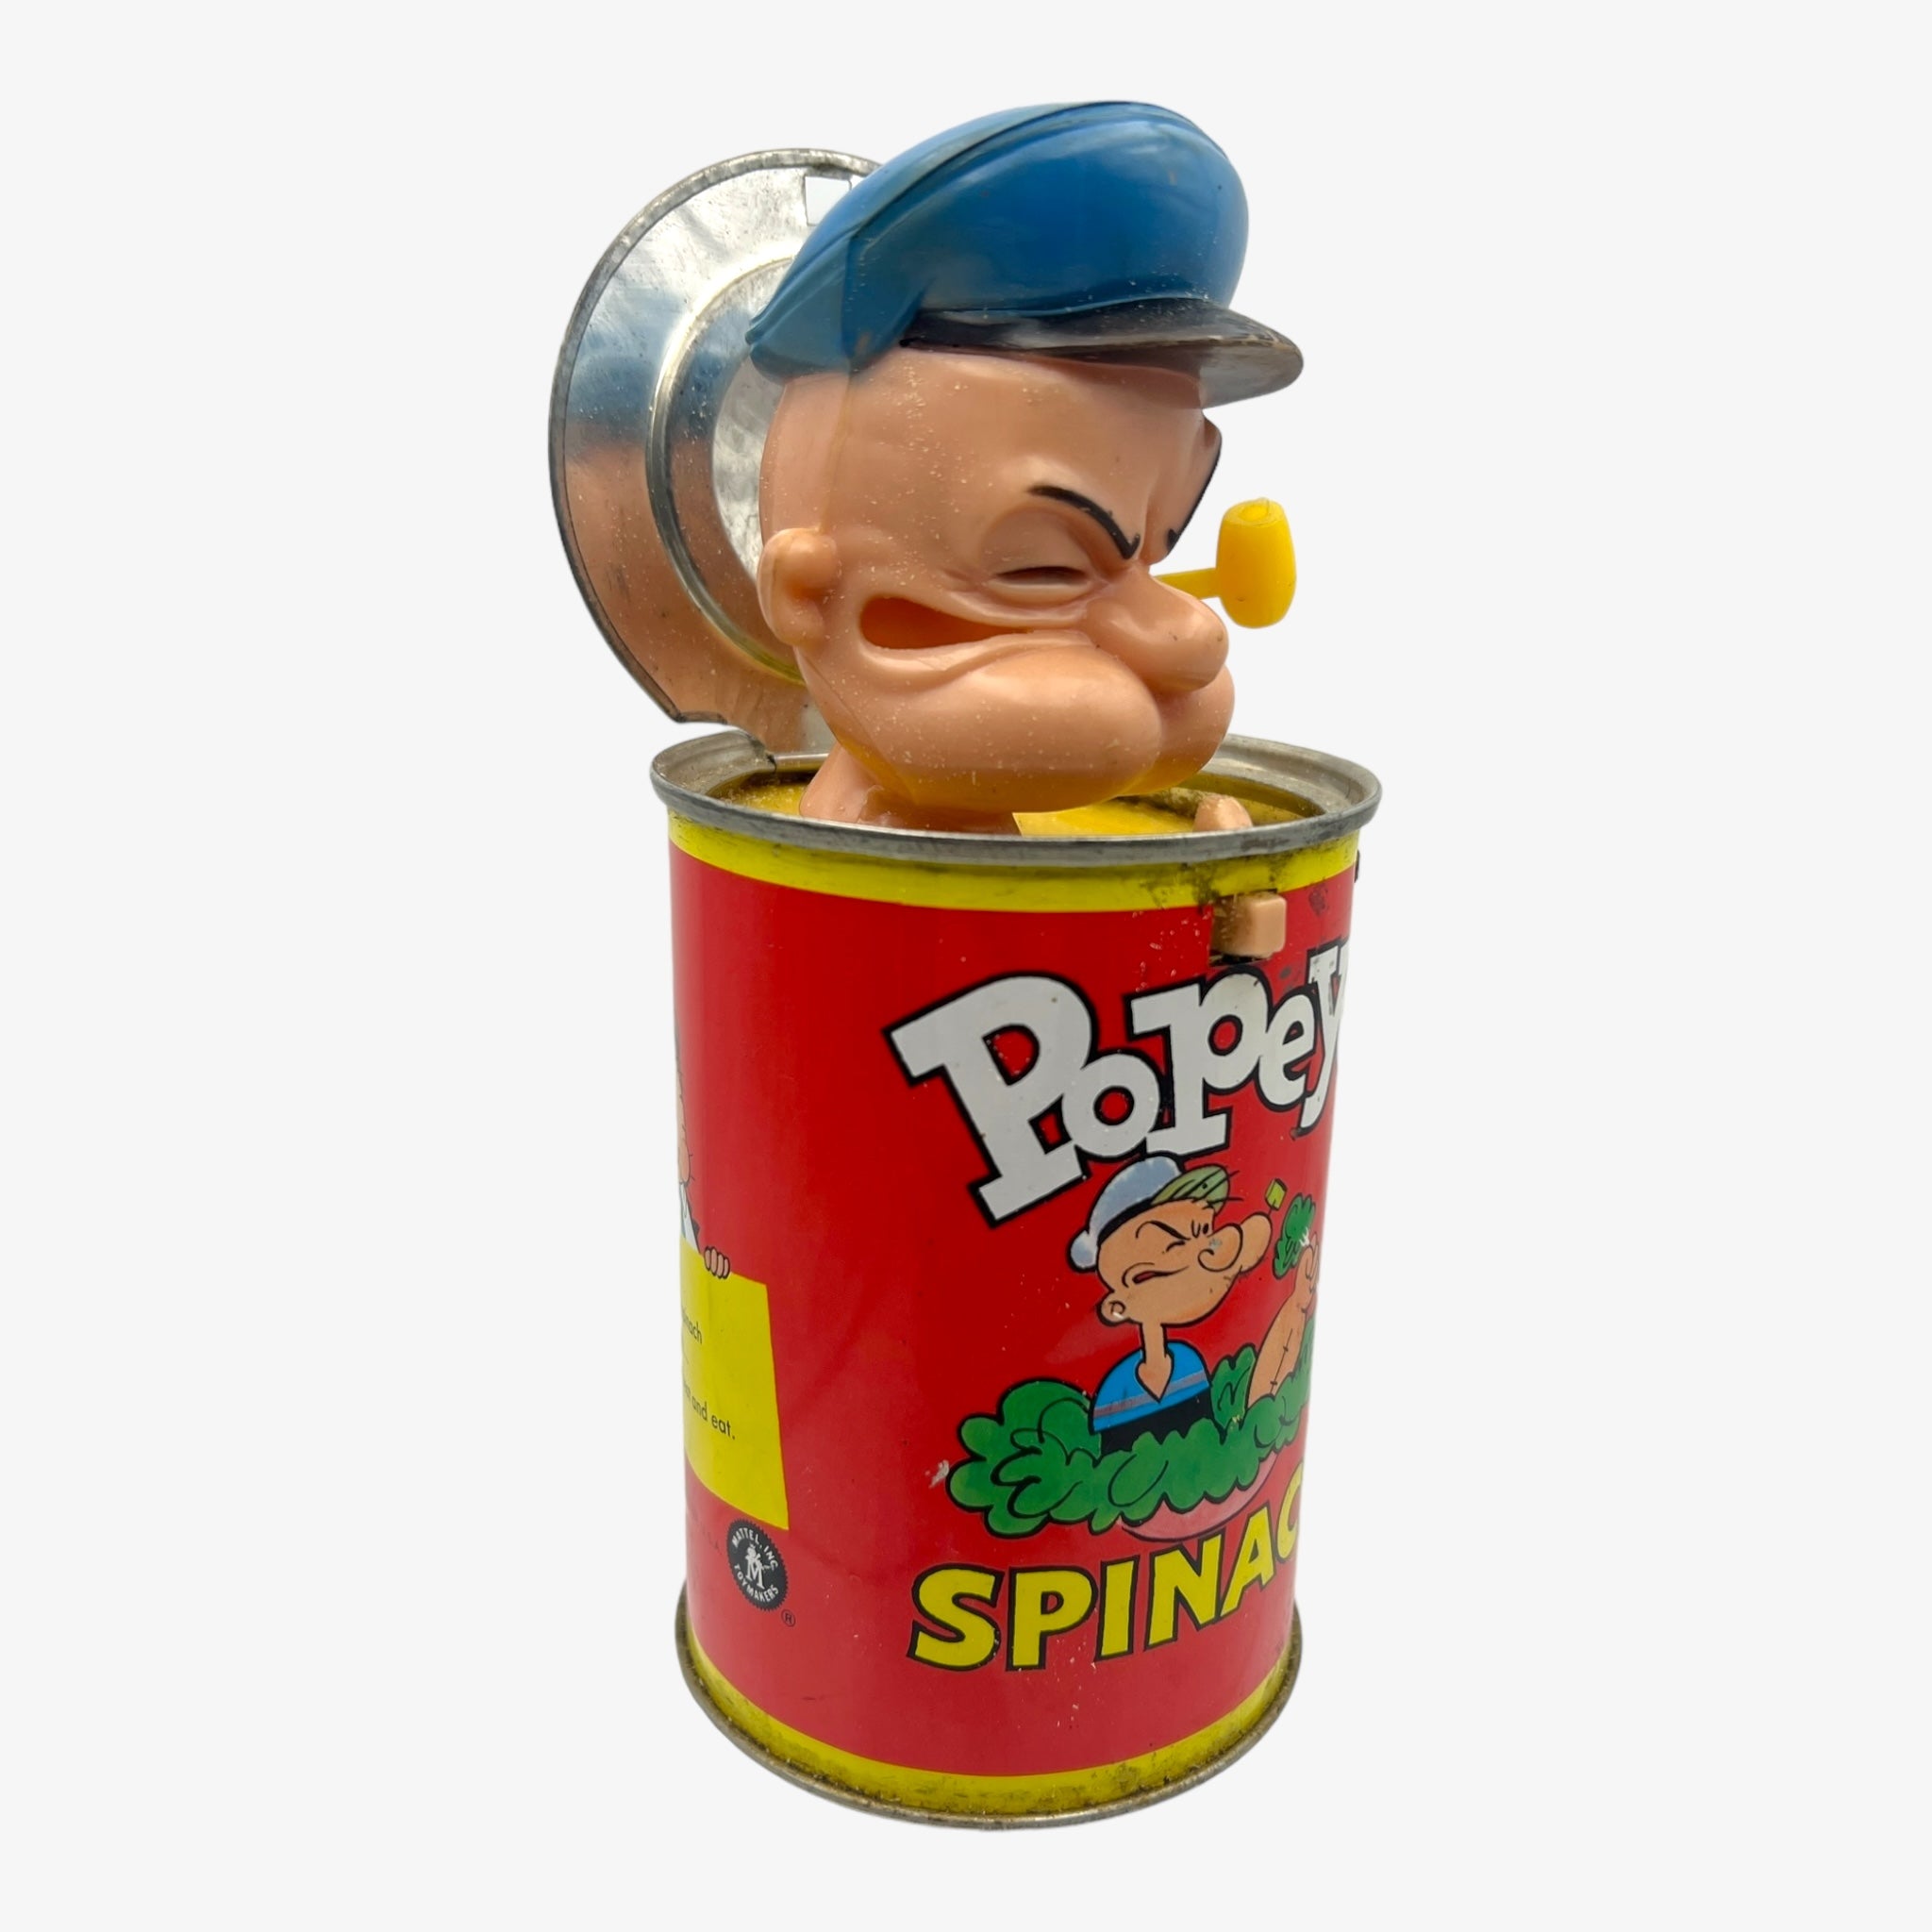 Rare Vintage 1957 Popeye Spinach Can